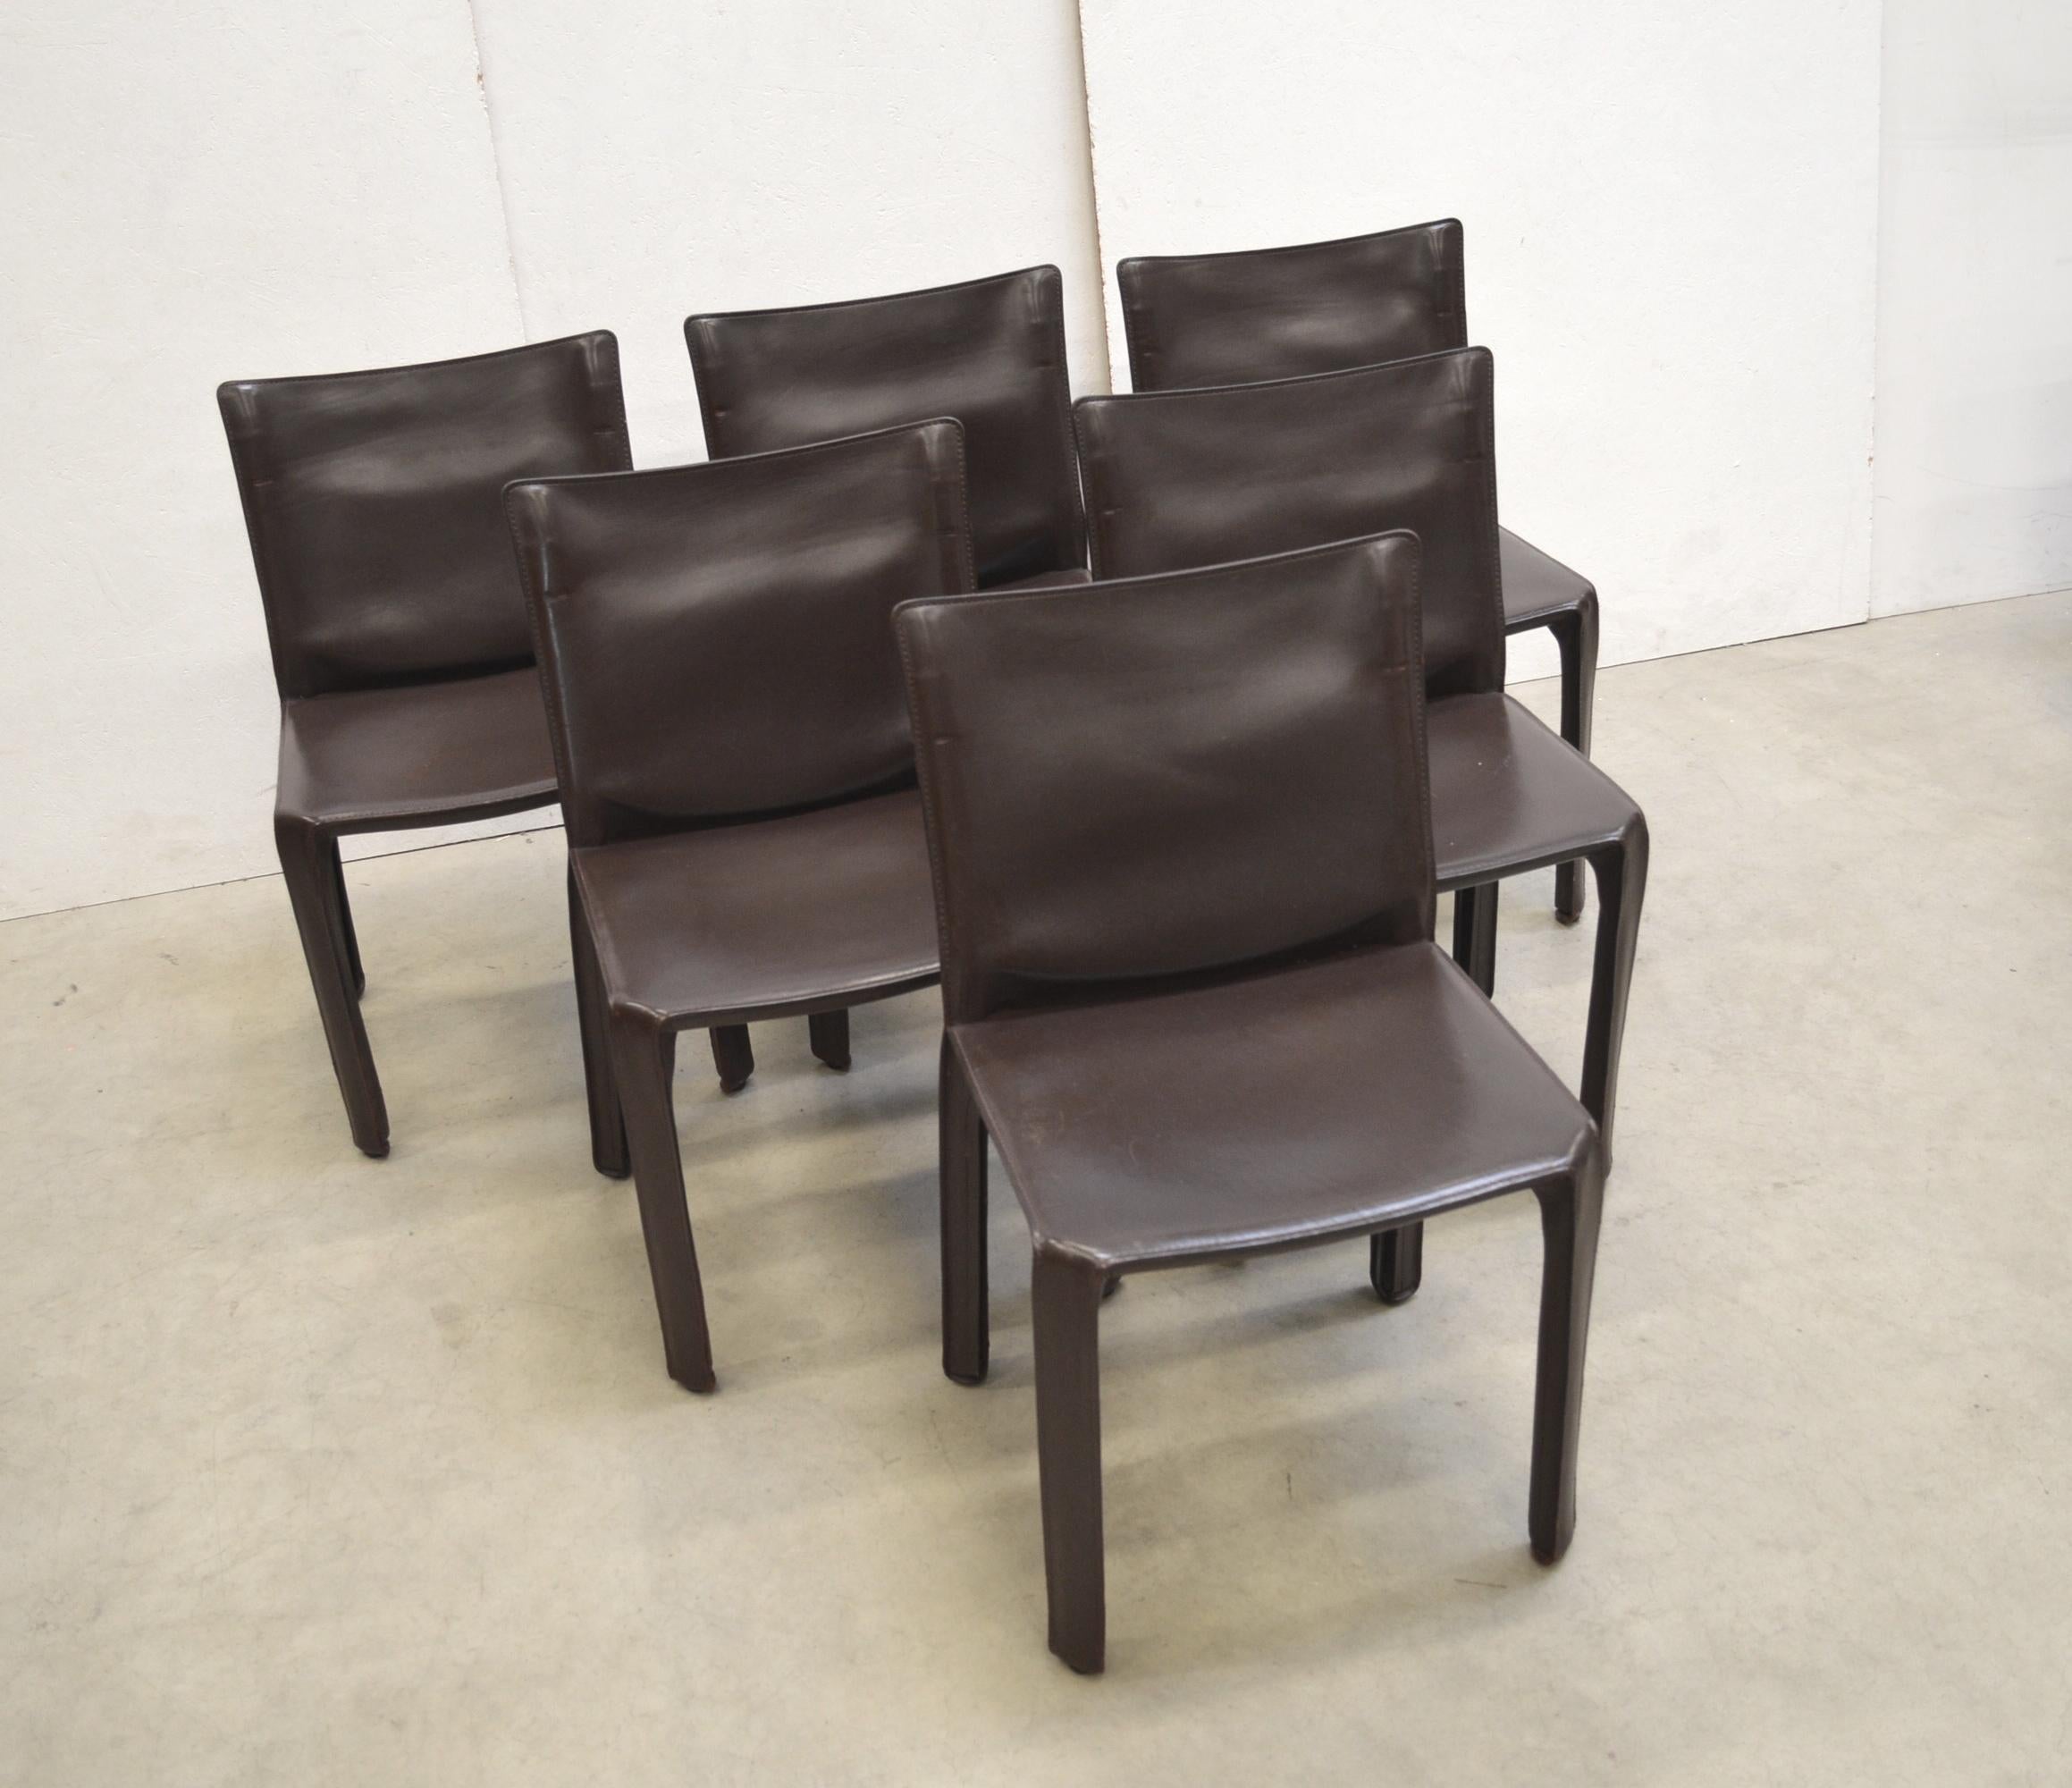 Set of 6 iconic cab chair model 412 by Mario Bellini for Cassina.
Original made in Italy.

Full Chocolate brown saddle leather which comes in nice condition with light patina.

Timeless design pieces. Maker's label on bottom of seat.
Overall